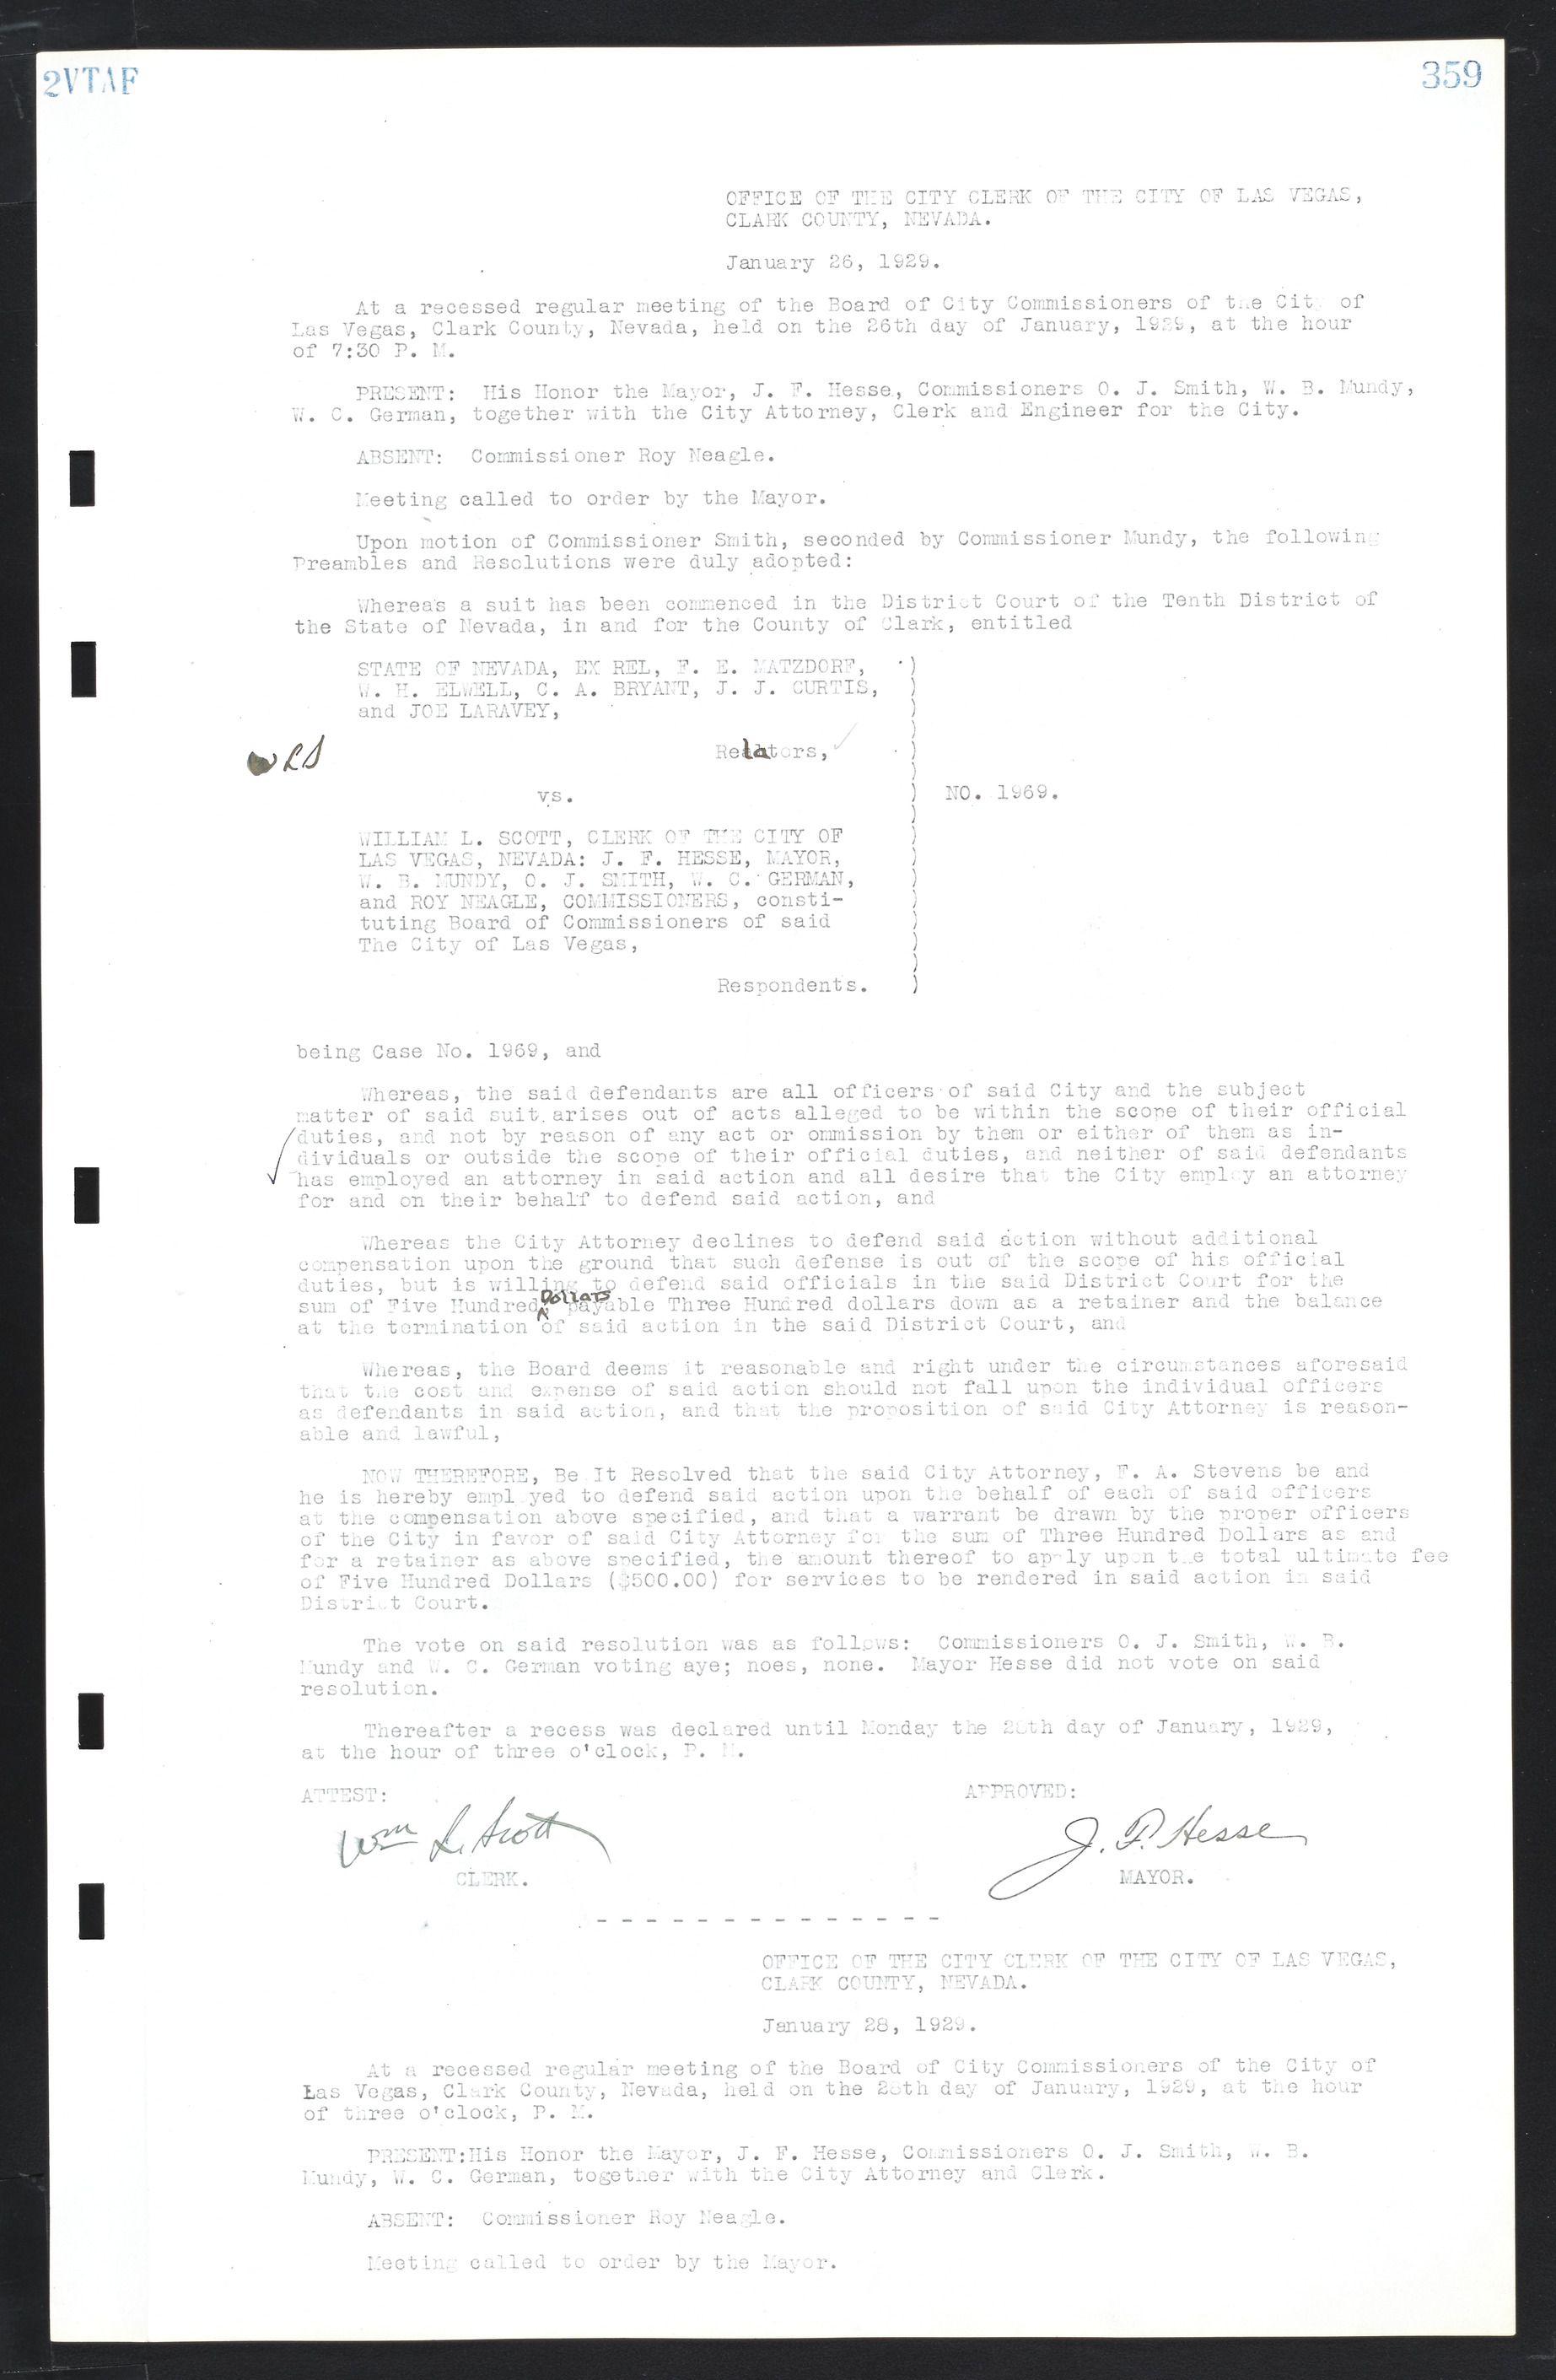 Las Vegas City Commission Minutes, March 1, 1922 to May 10, 1929, lvc000002-368